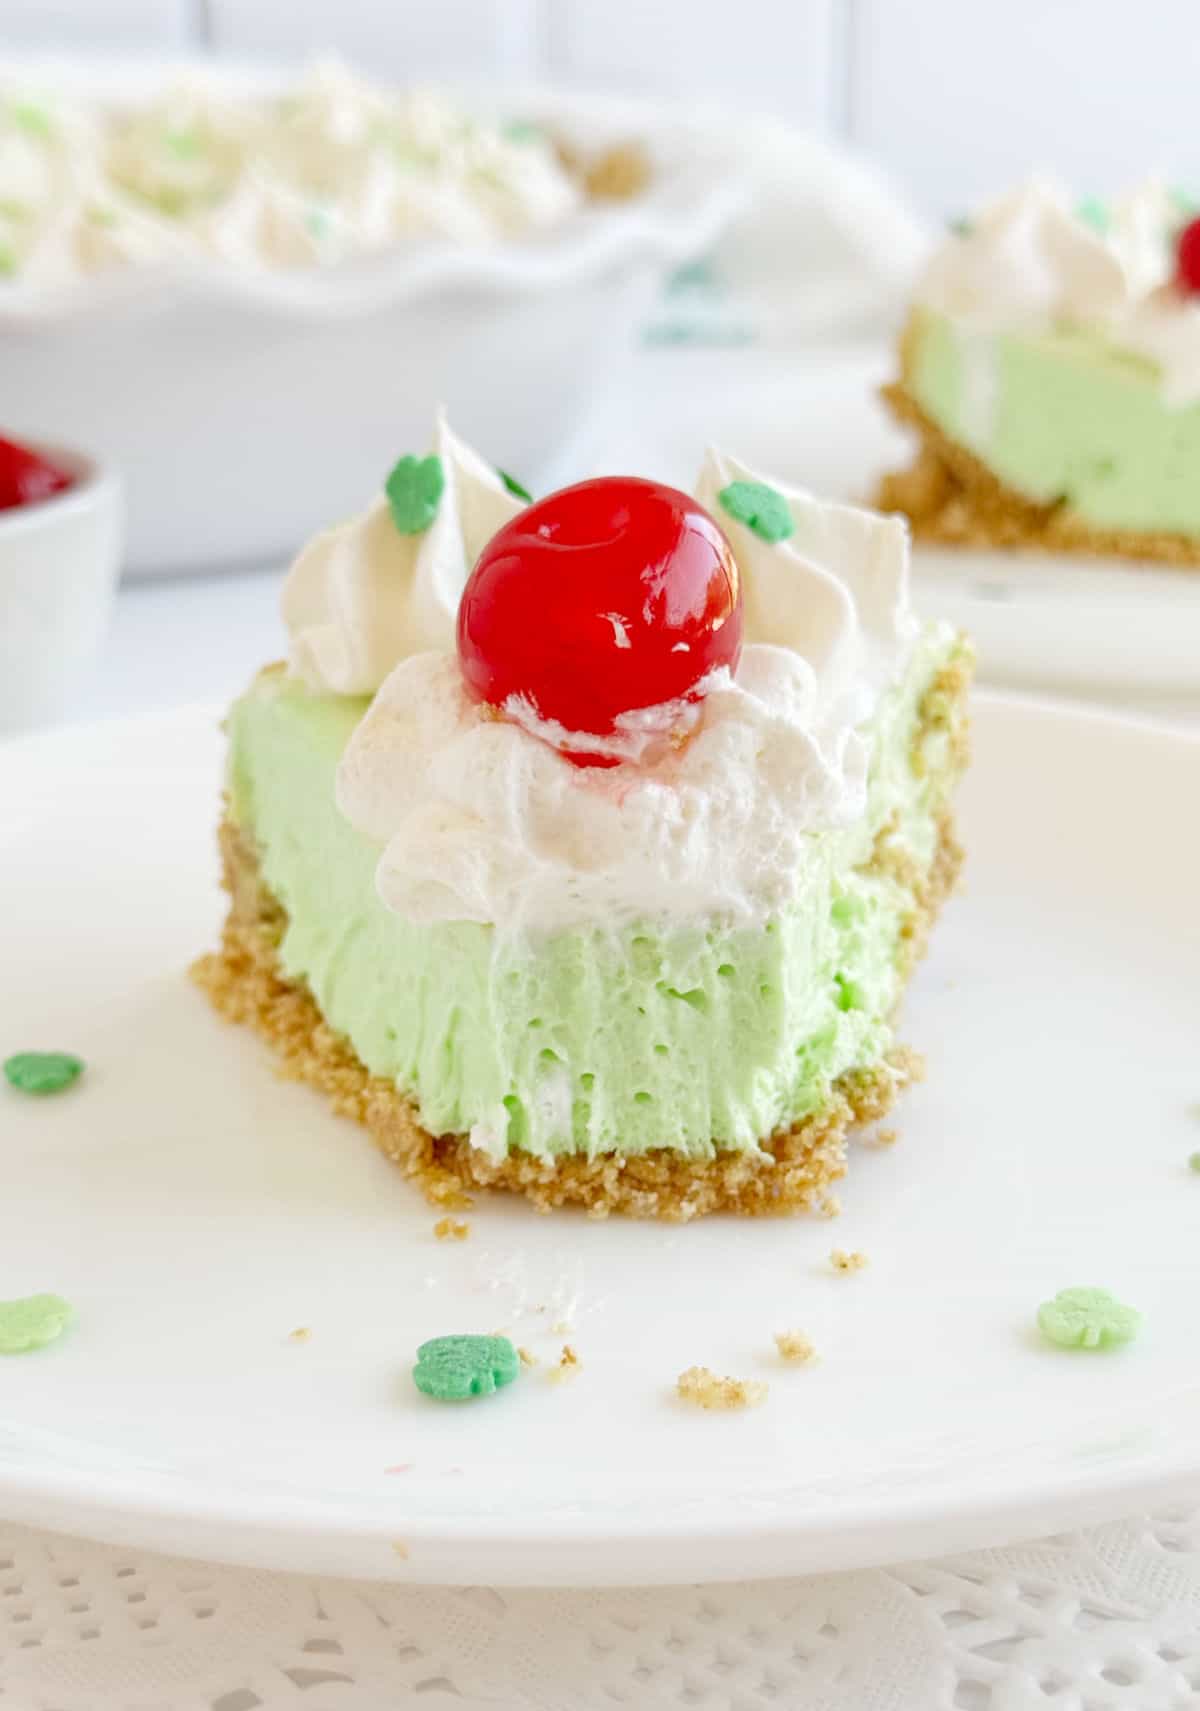 shamrock pie with cherry on top on plate.